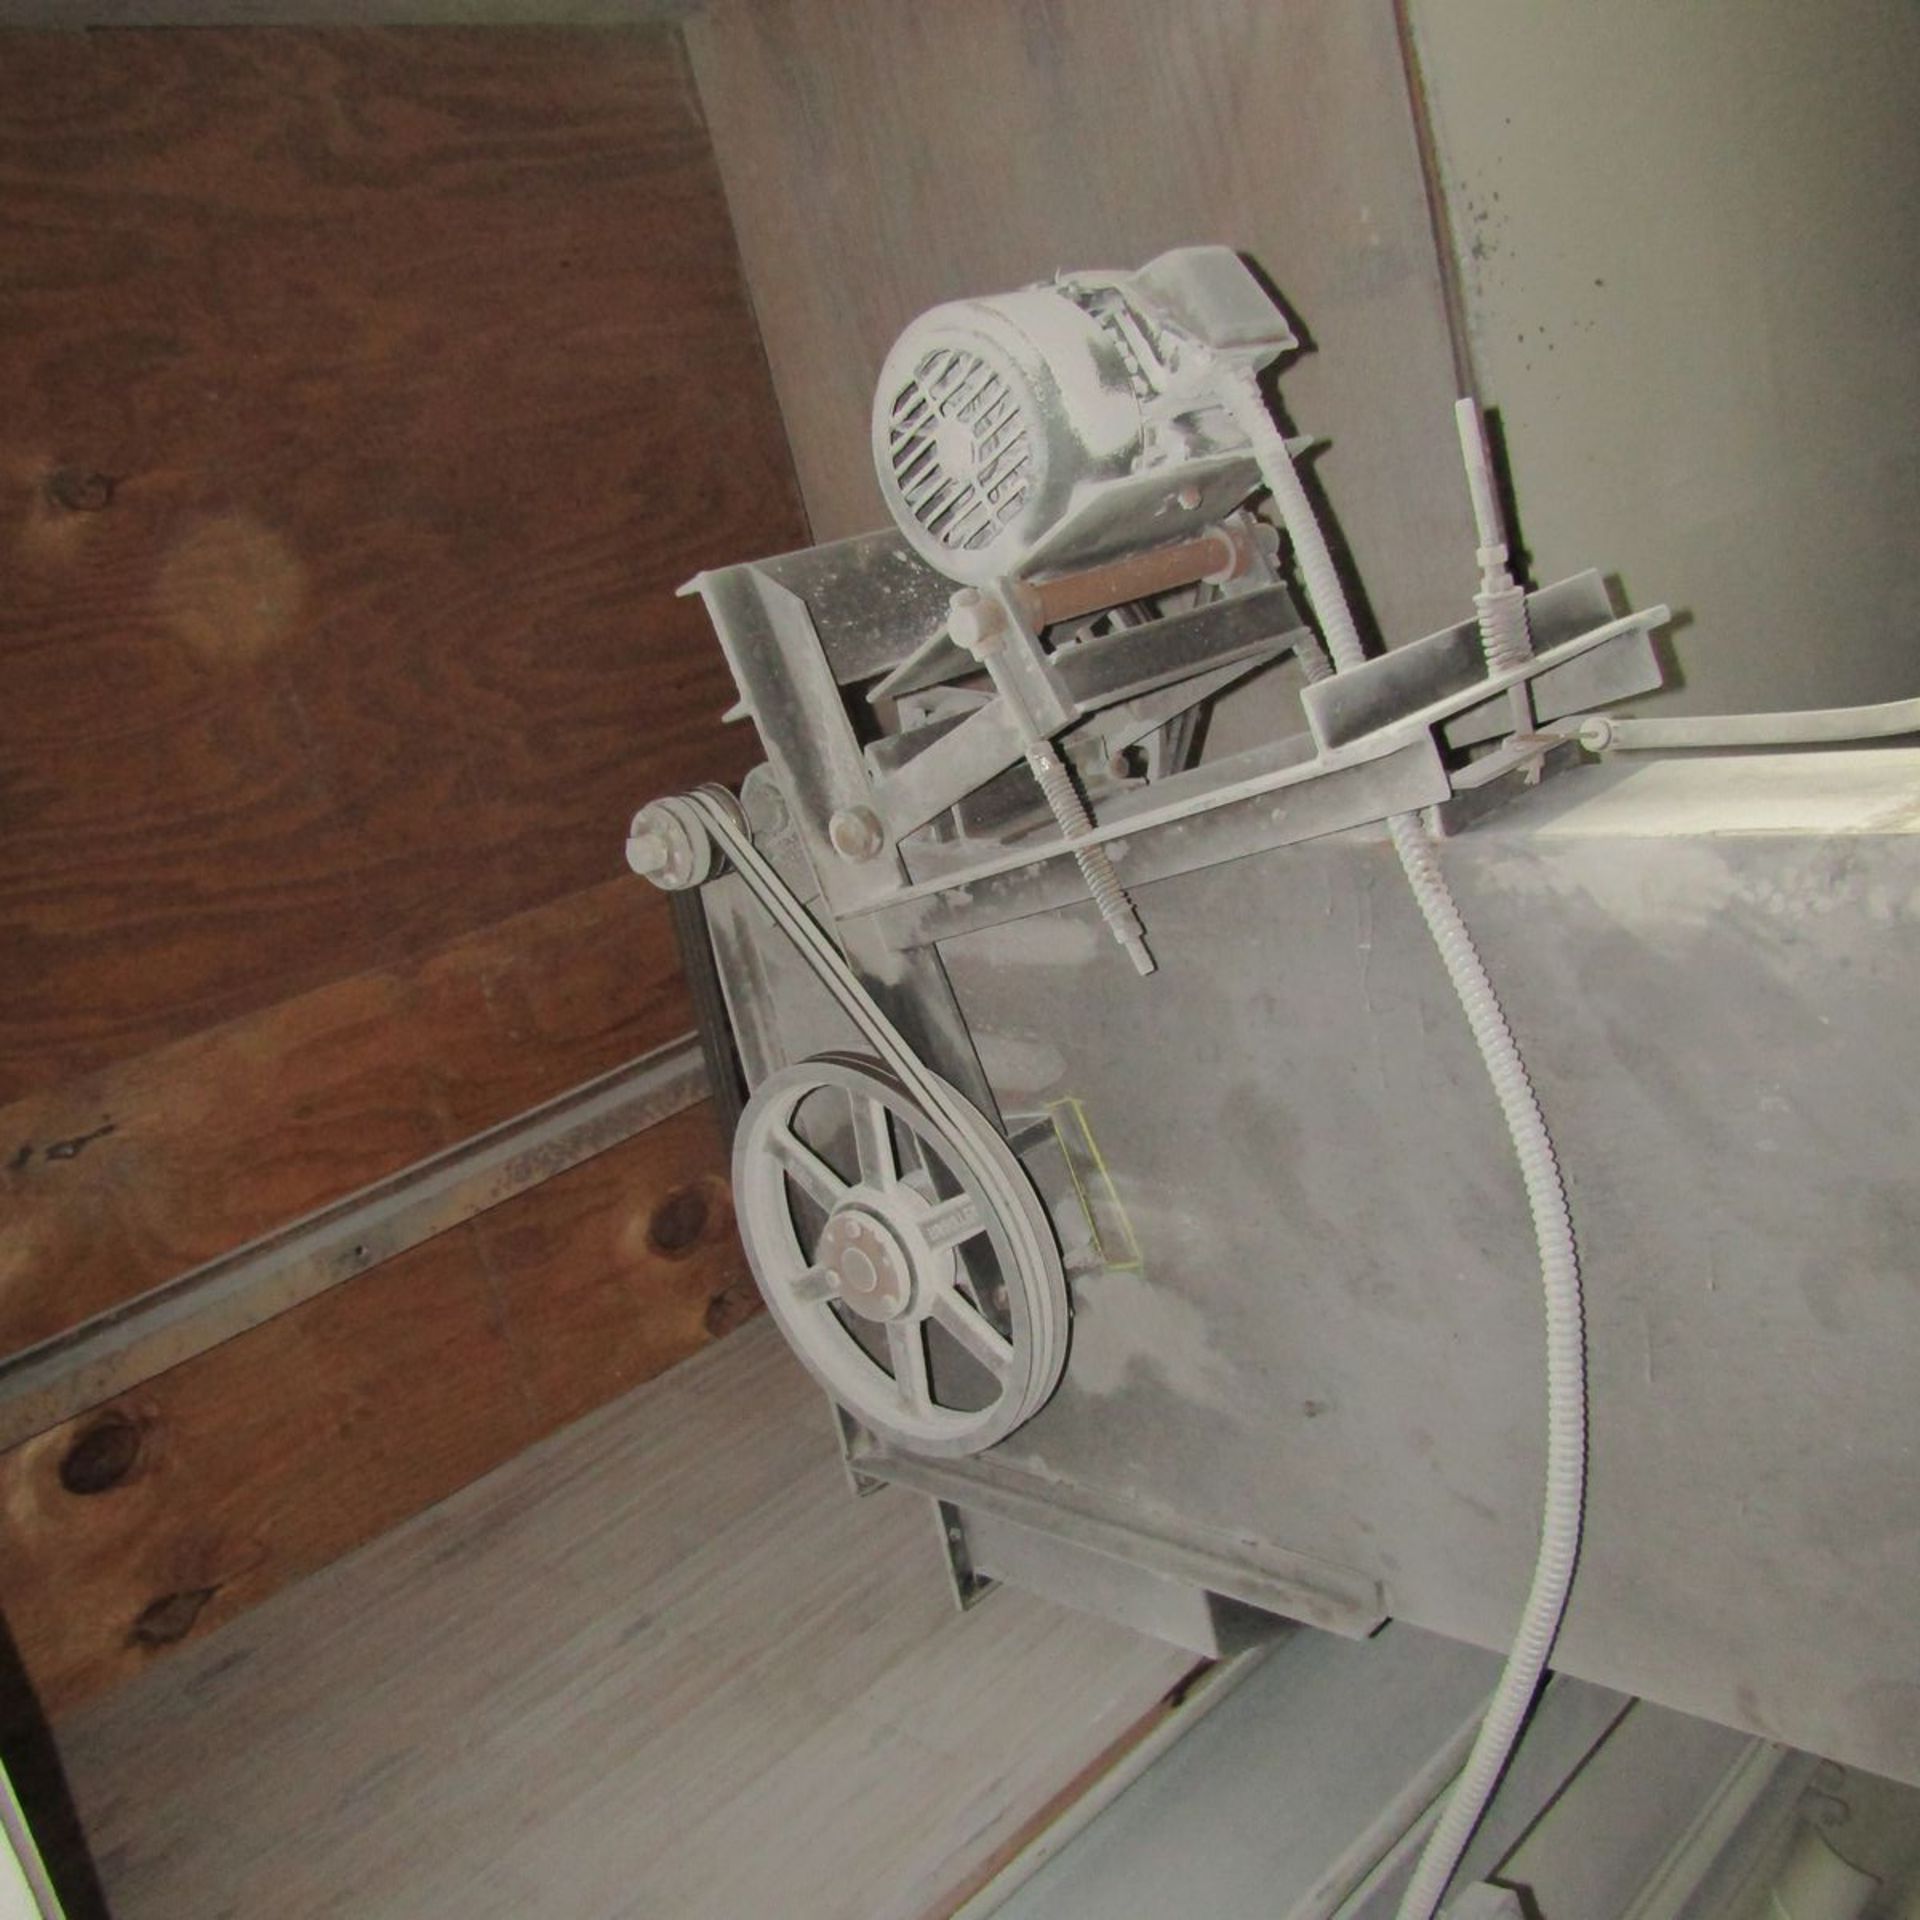 Ruemelin D-6440 Dust Collection System - Image 2 of 5